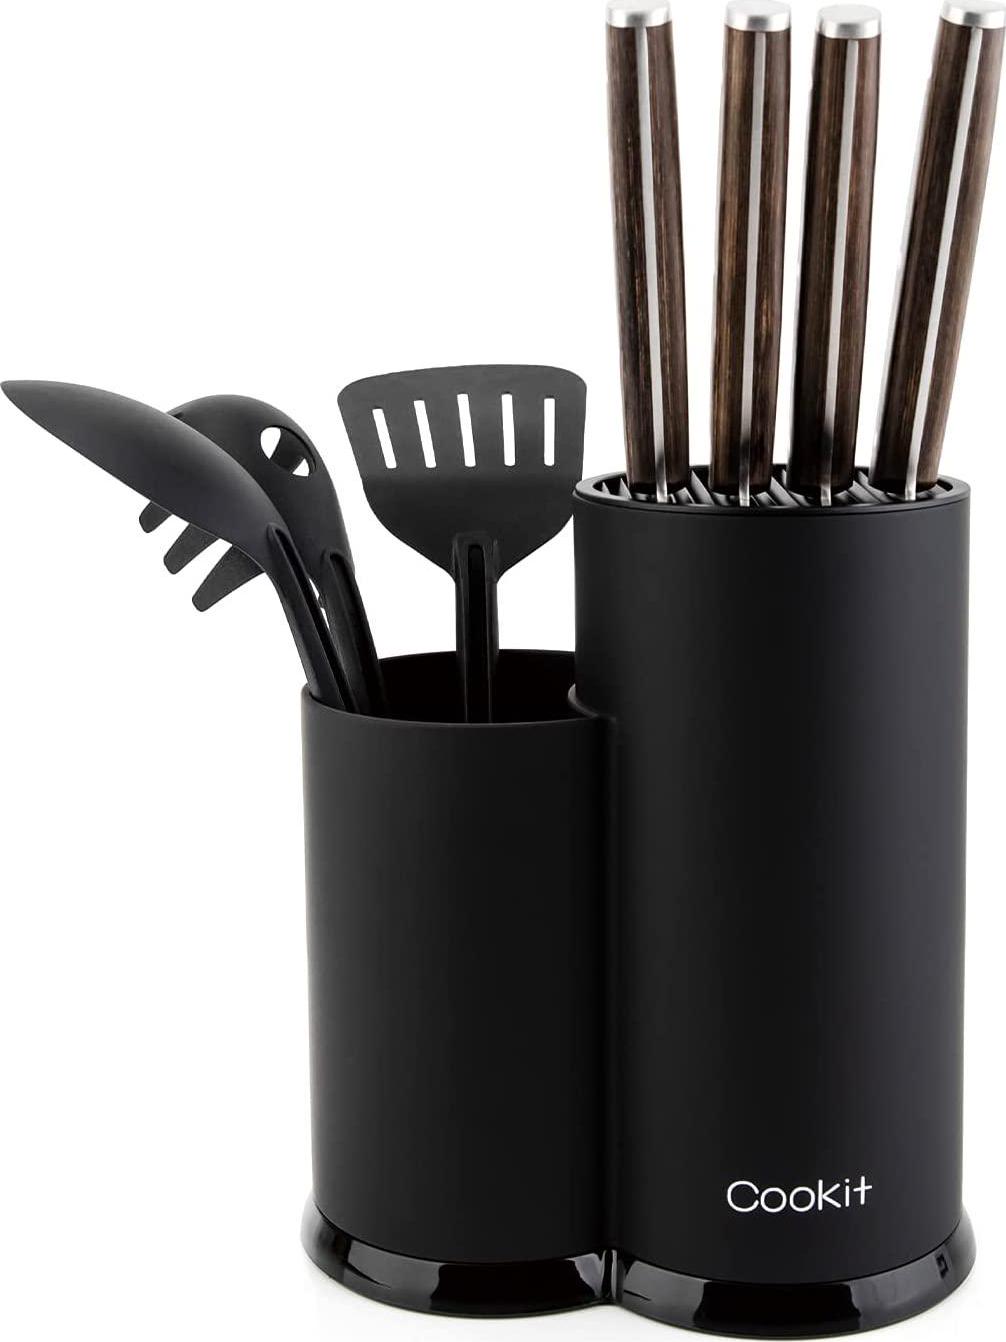 Cookit, Knife Block, Cookit kitchen Universal Knife Holder without Knives, Detachable Knife Storage with Scissors Slot, Space Saver Multi-function Knife Utensil Organizer